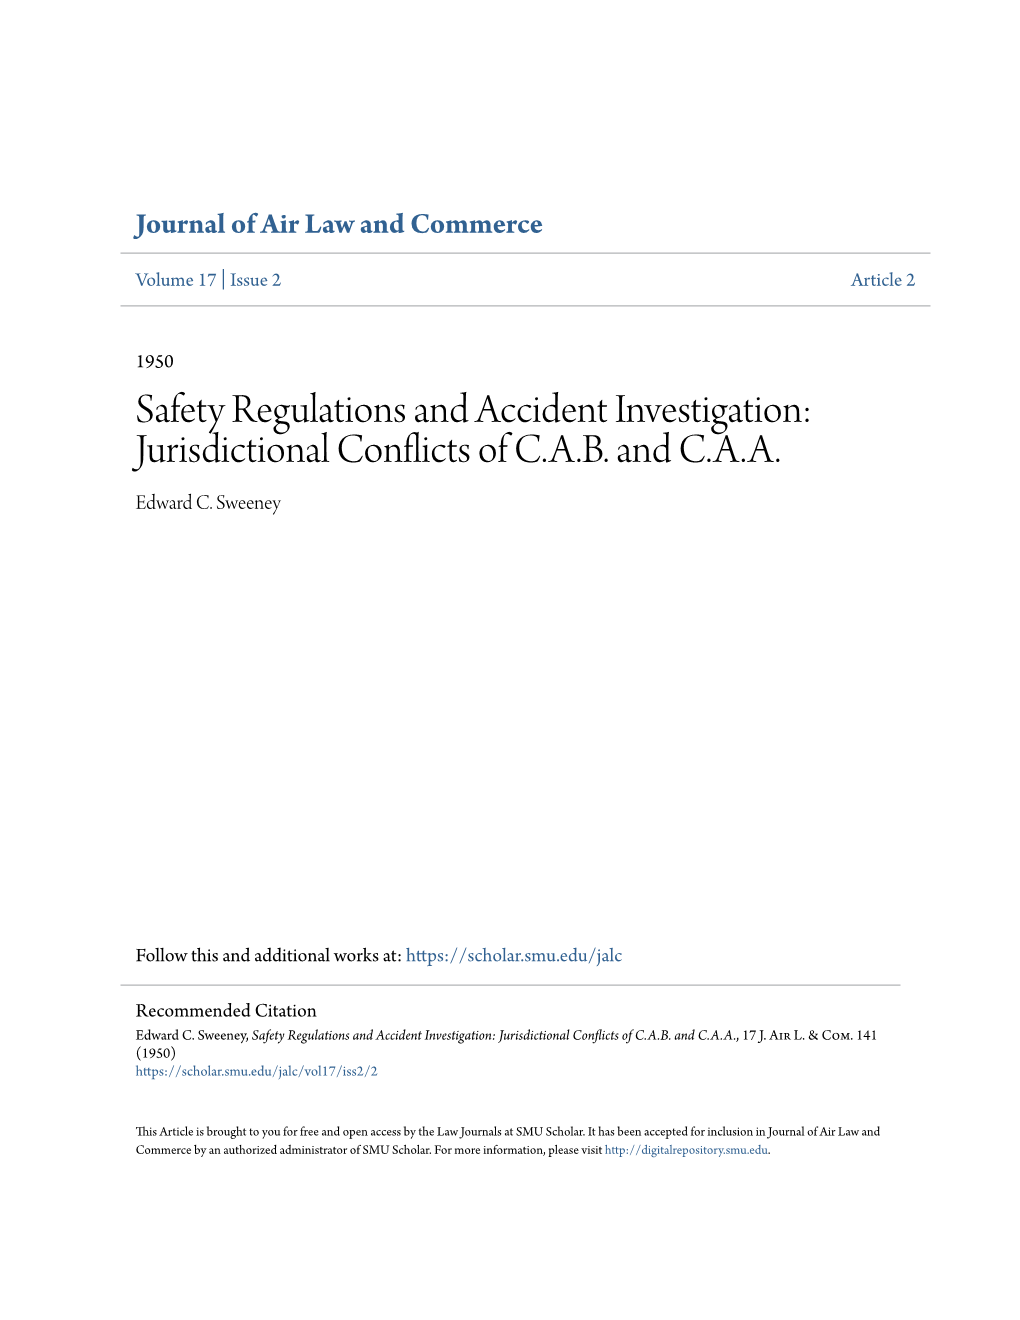 Safety Regulations and Accident Investigation: Jurisdictional Conflicts of C.A.B